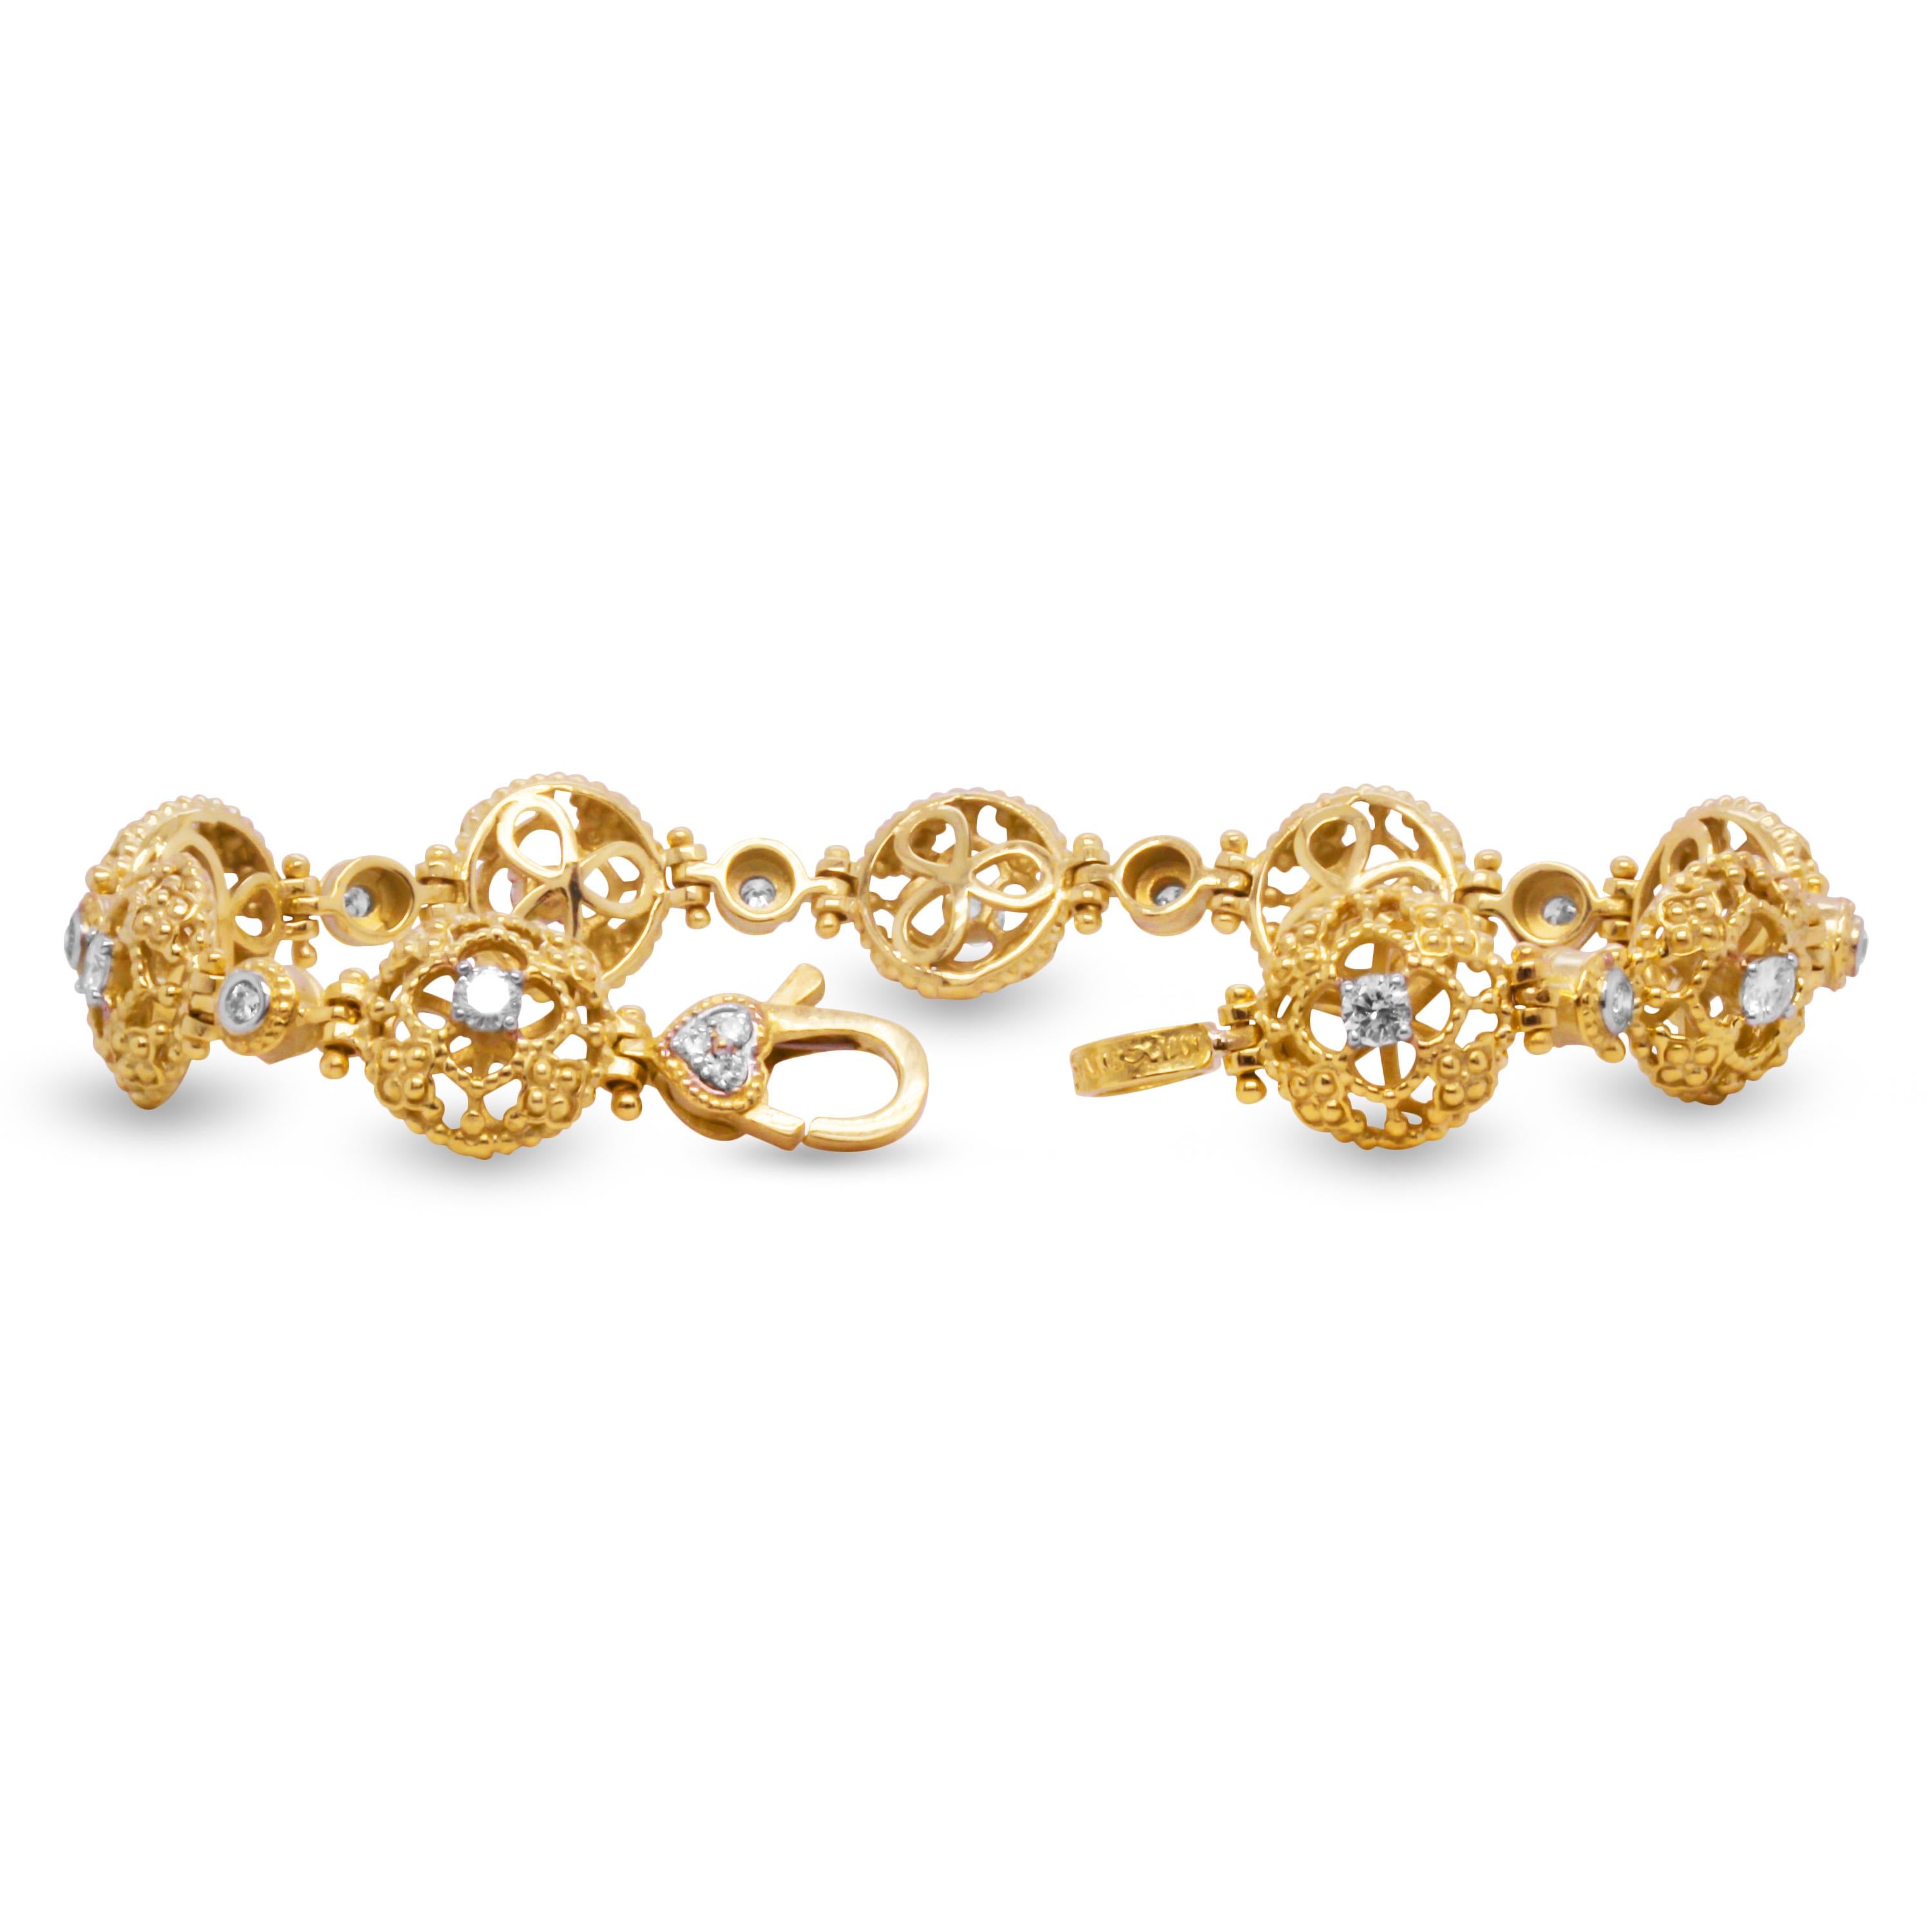 Stambolian 18K Yellow Gold and Diamond Circle Link Open Work Bracelet

From the 2022 collection, this bracelet features a single diamond in each section.

Apprx. 1.28ct. G color, VS clarity diamonds total weight

Bracelet uses a lobster clasp. 7